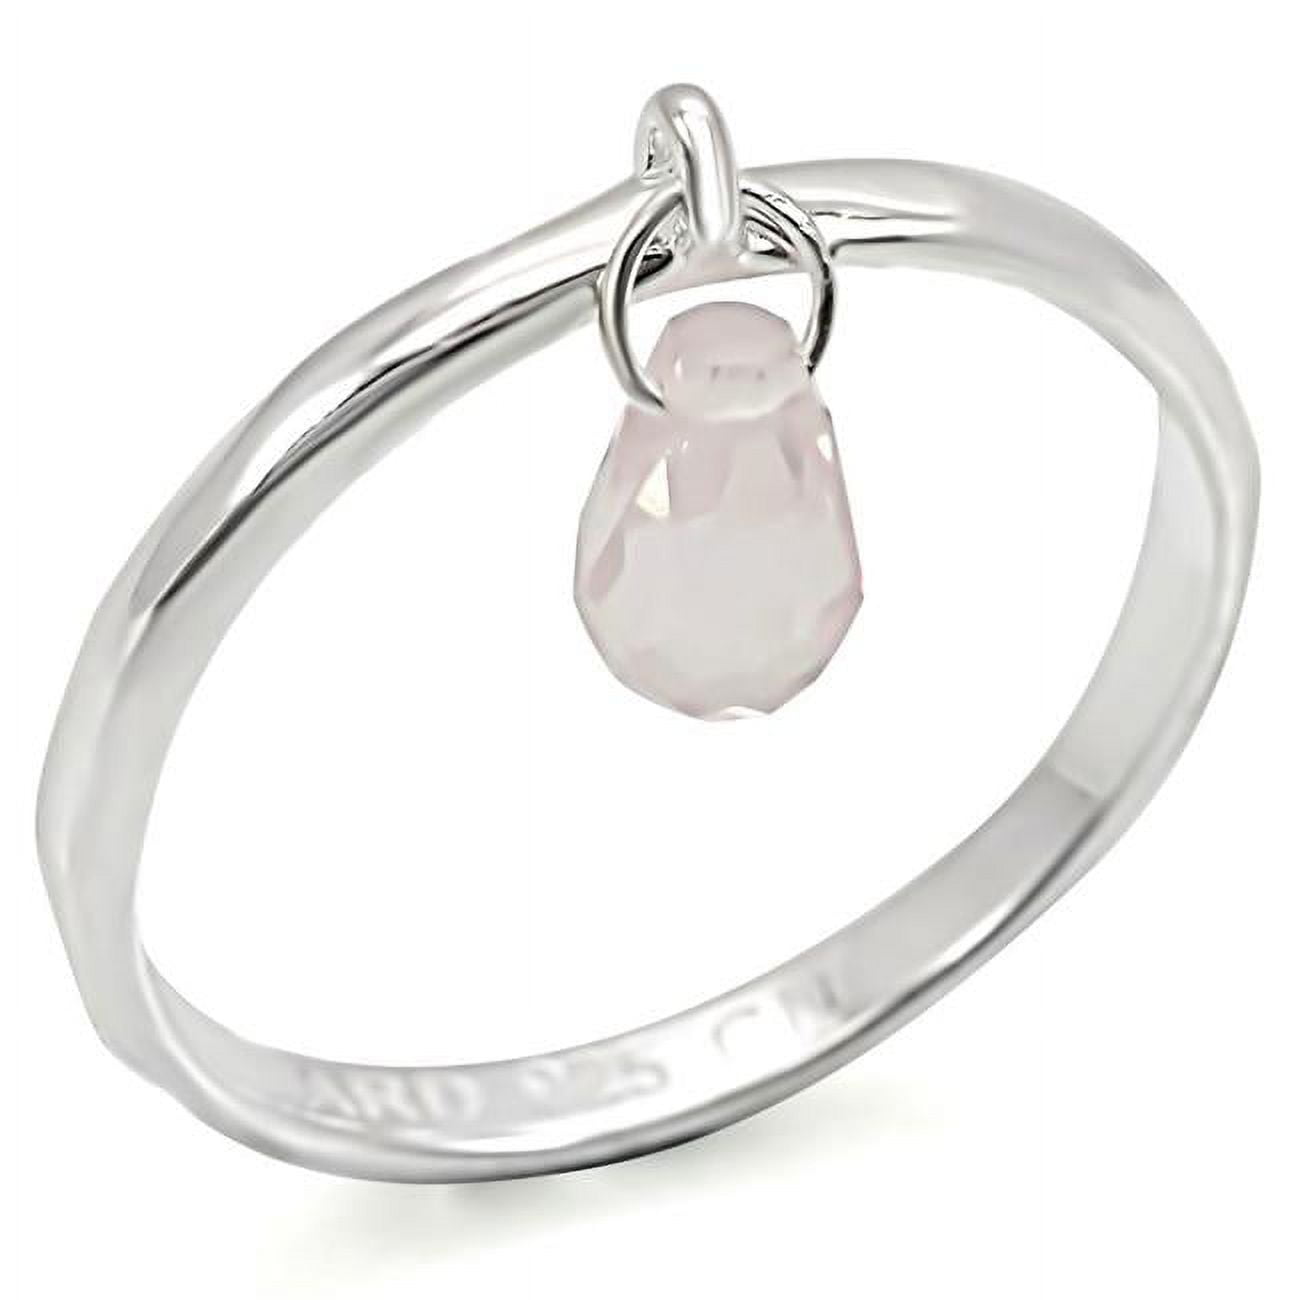 Picture of Alamode LOS323-10 Women Silver 925 Sterling Silver Ring with Genuine Stone in Light Rose - Size 10